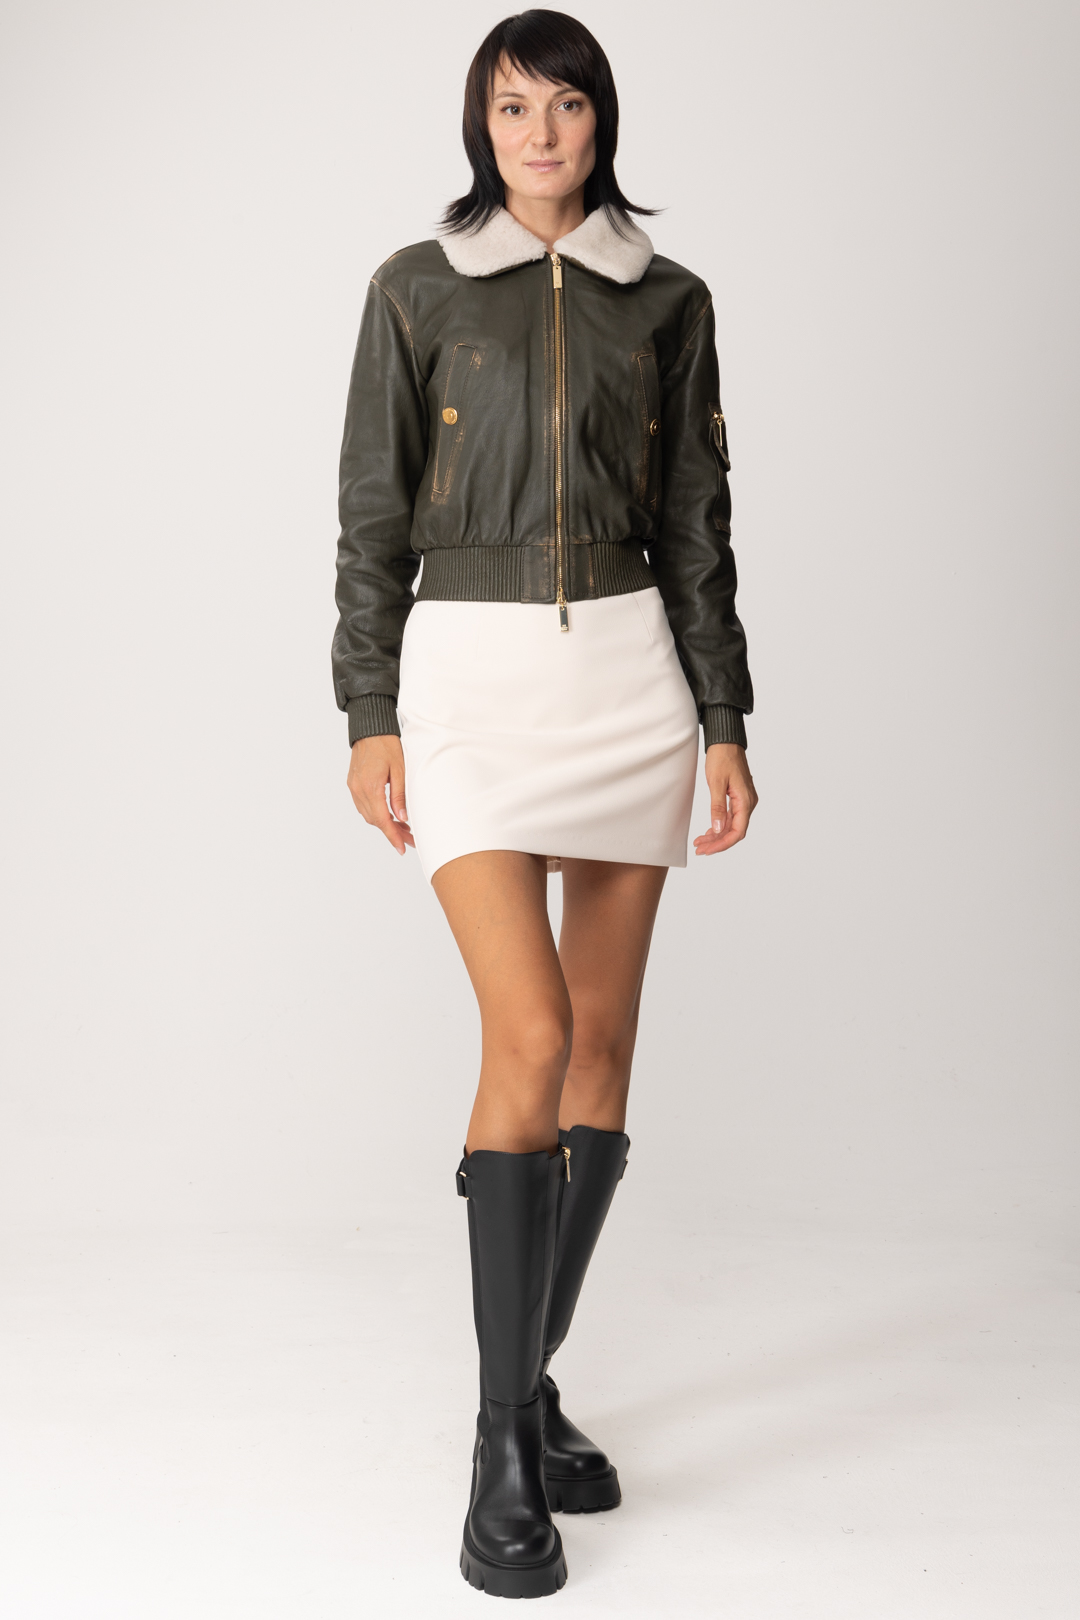 Preview: Elisabetta Franchi Bomber jacket in leather with sheepskin collar ARMY